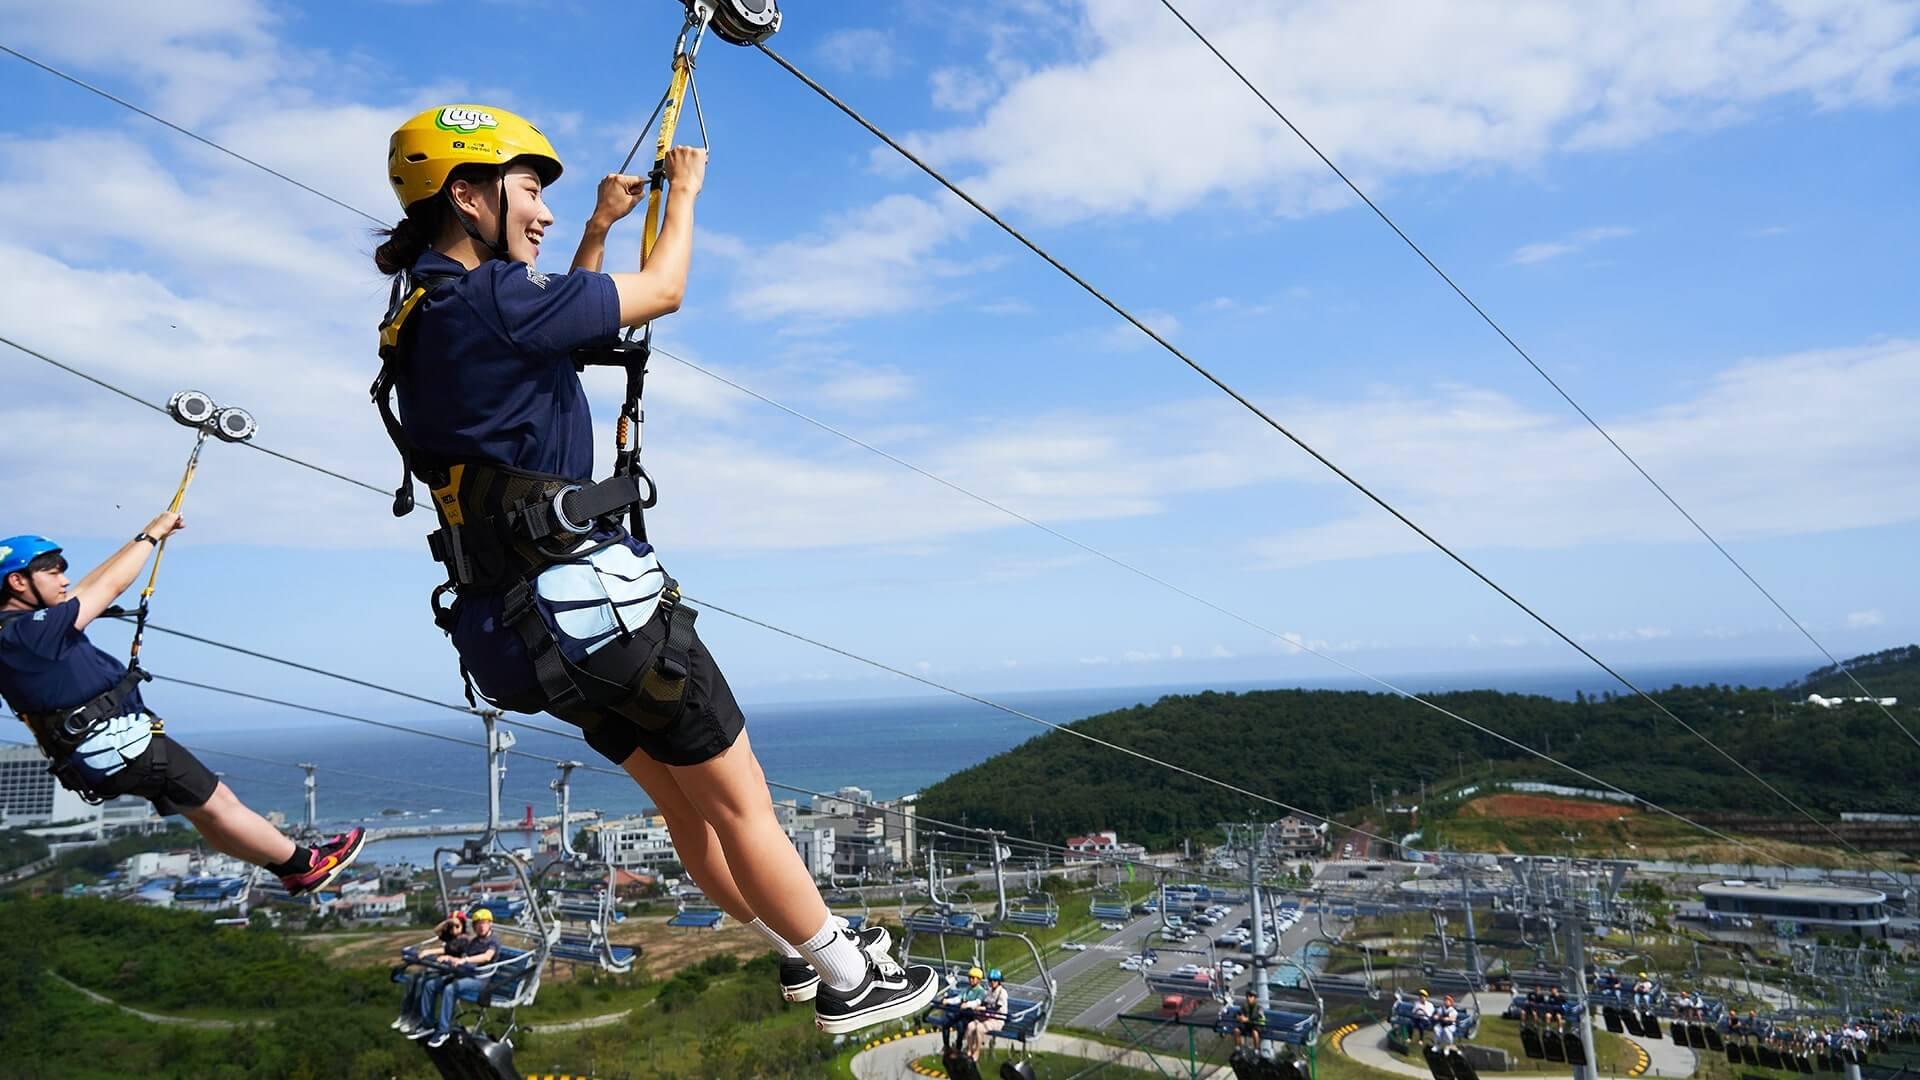 Two friends prepare to ride the Hyfly zipline side by side at Skyline Luge Busan.